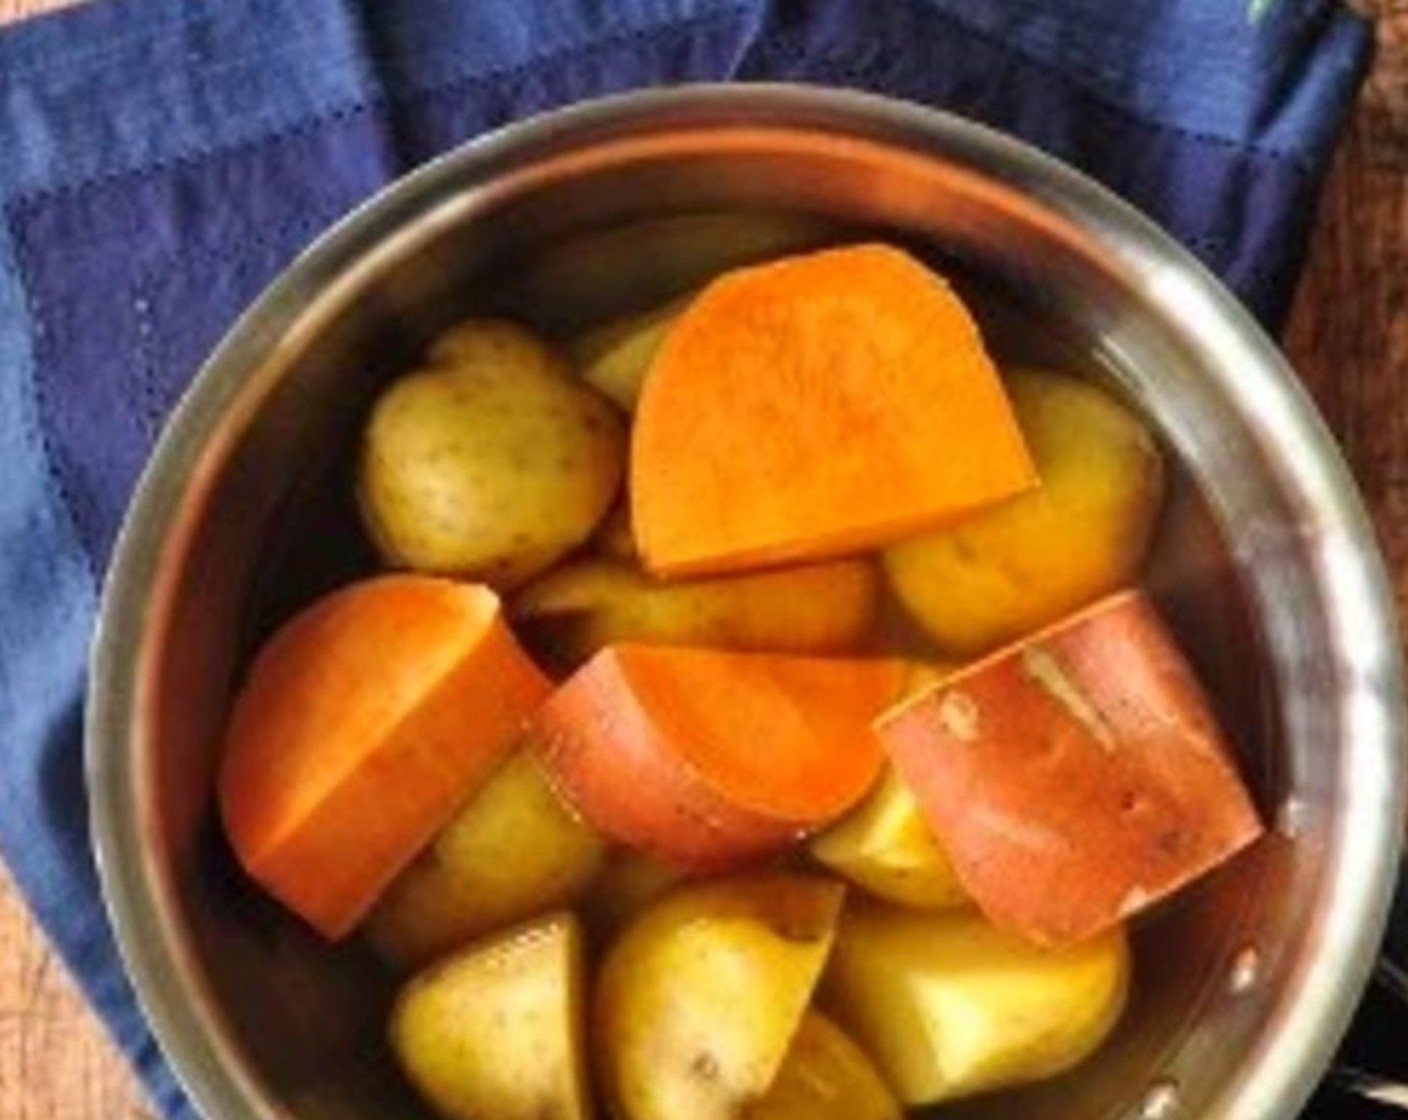 step 2 In a medium saucepan, place gold potatoes at the bottom, sweet potatoes on top, then add just enough water to cover all the potatoes. Bring to a boil and simmer until potatoes are fork tender but not falling apart, about 25-30 minutes.